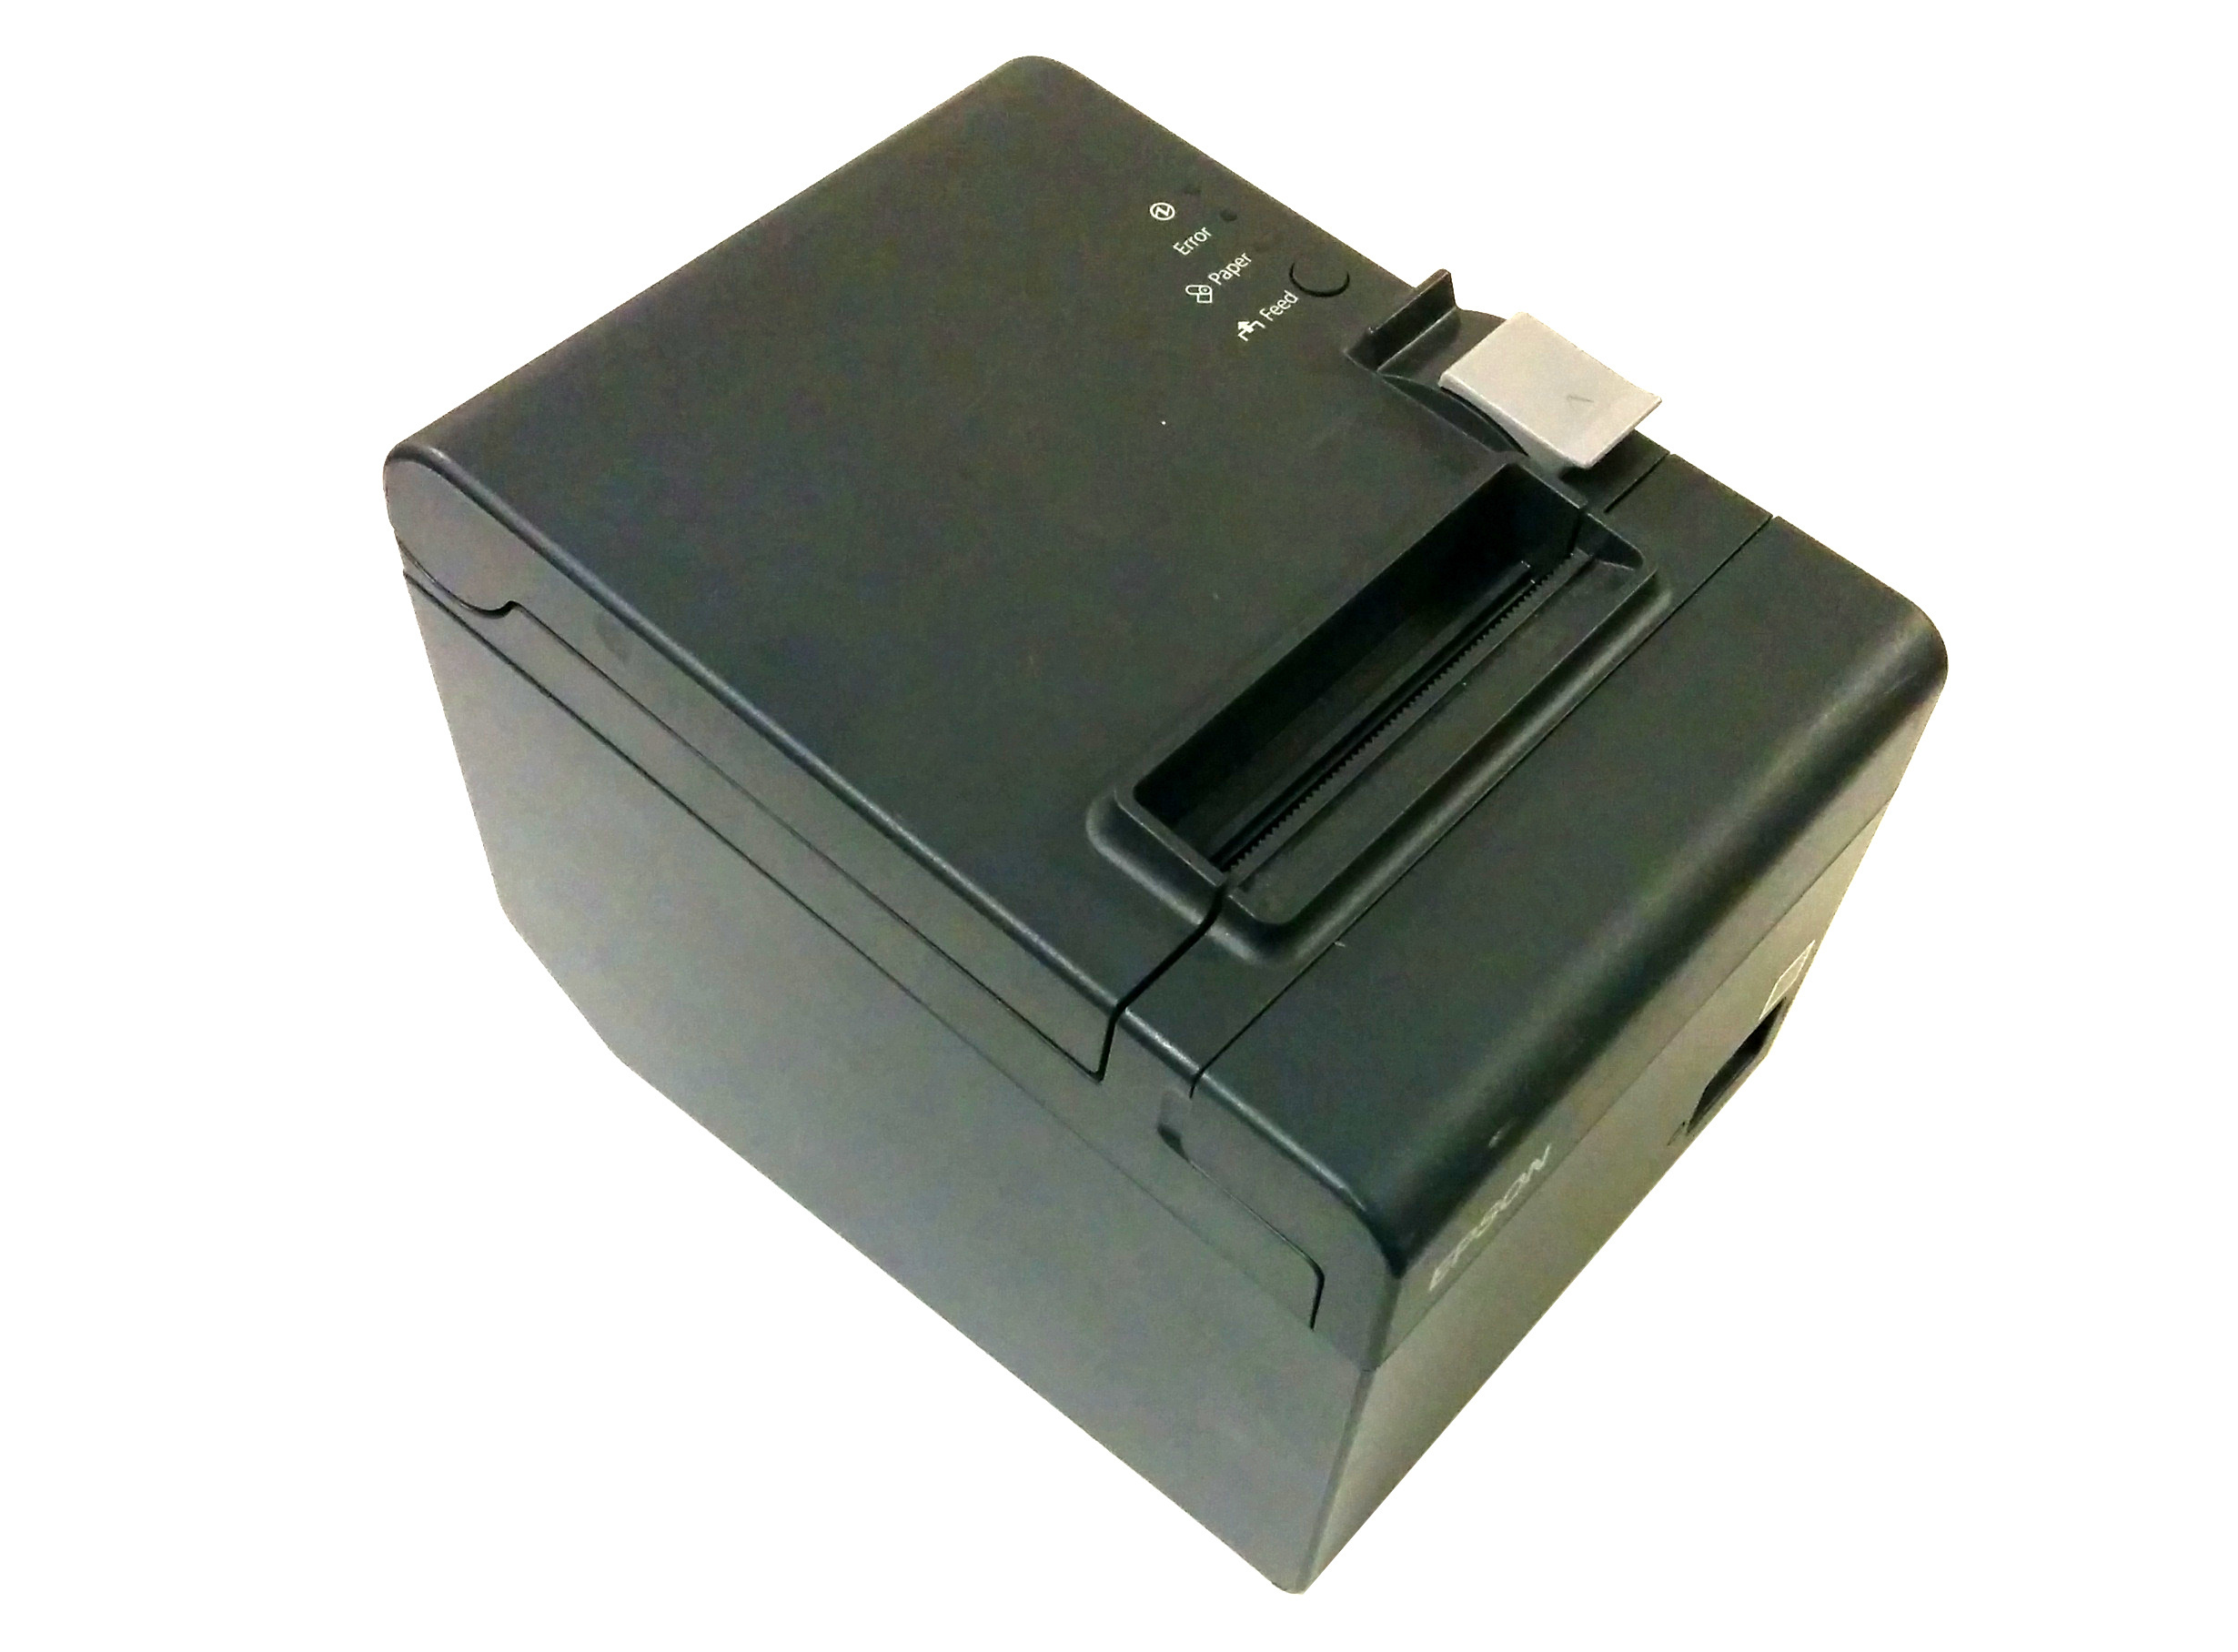 epson printer drivers for linux mint